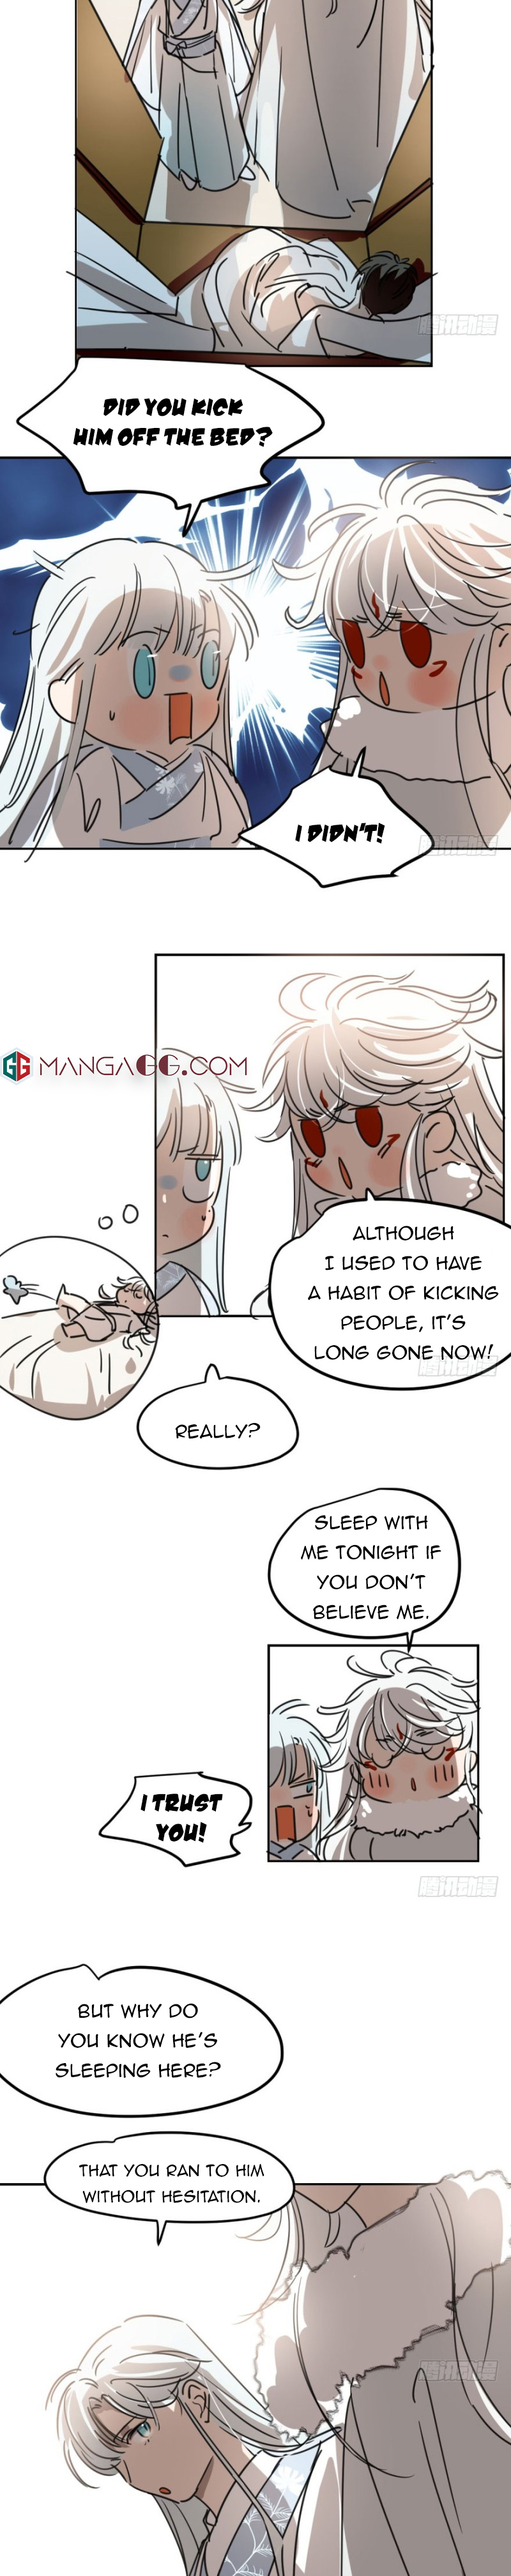 Chasing Ao Ao Chapter 29 - Page 2